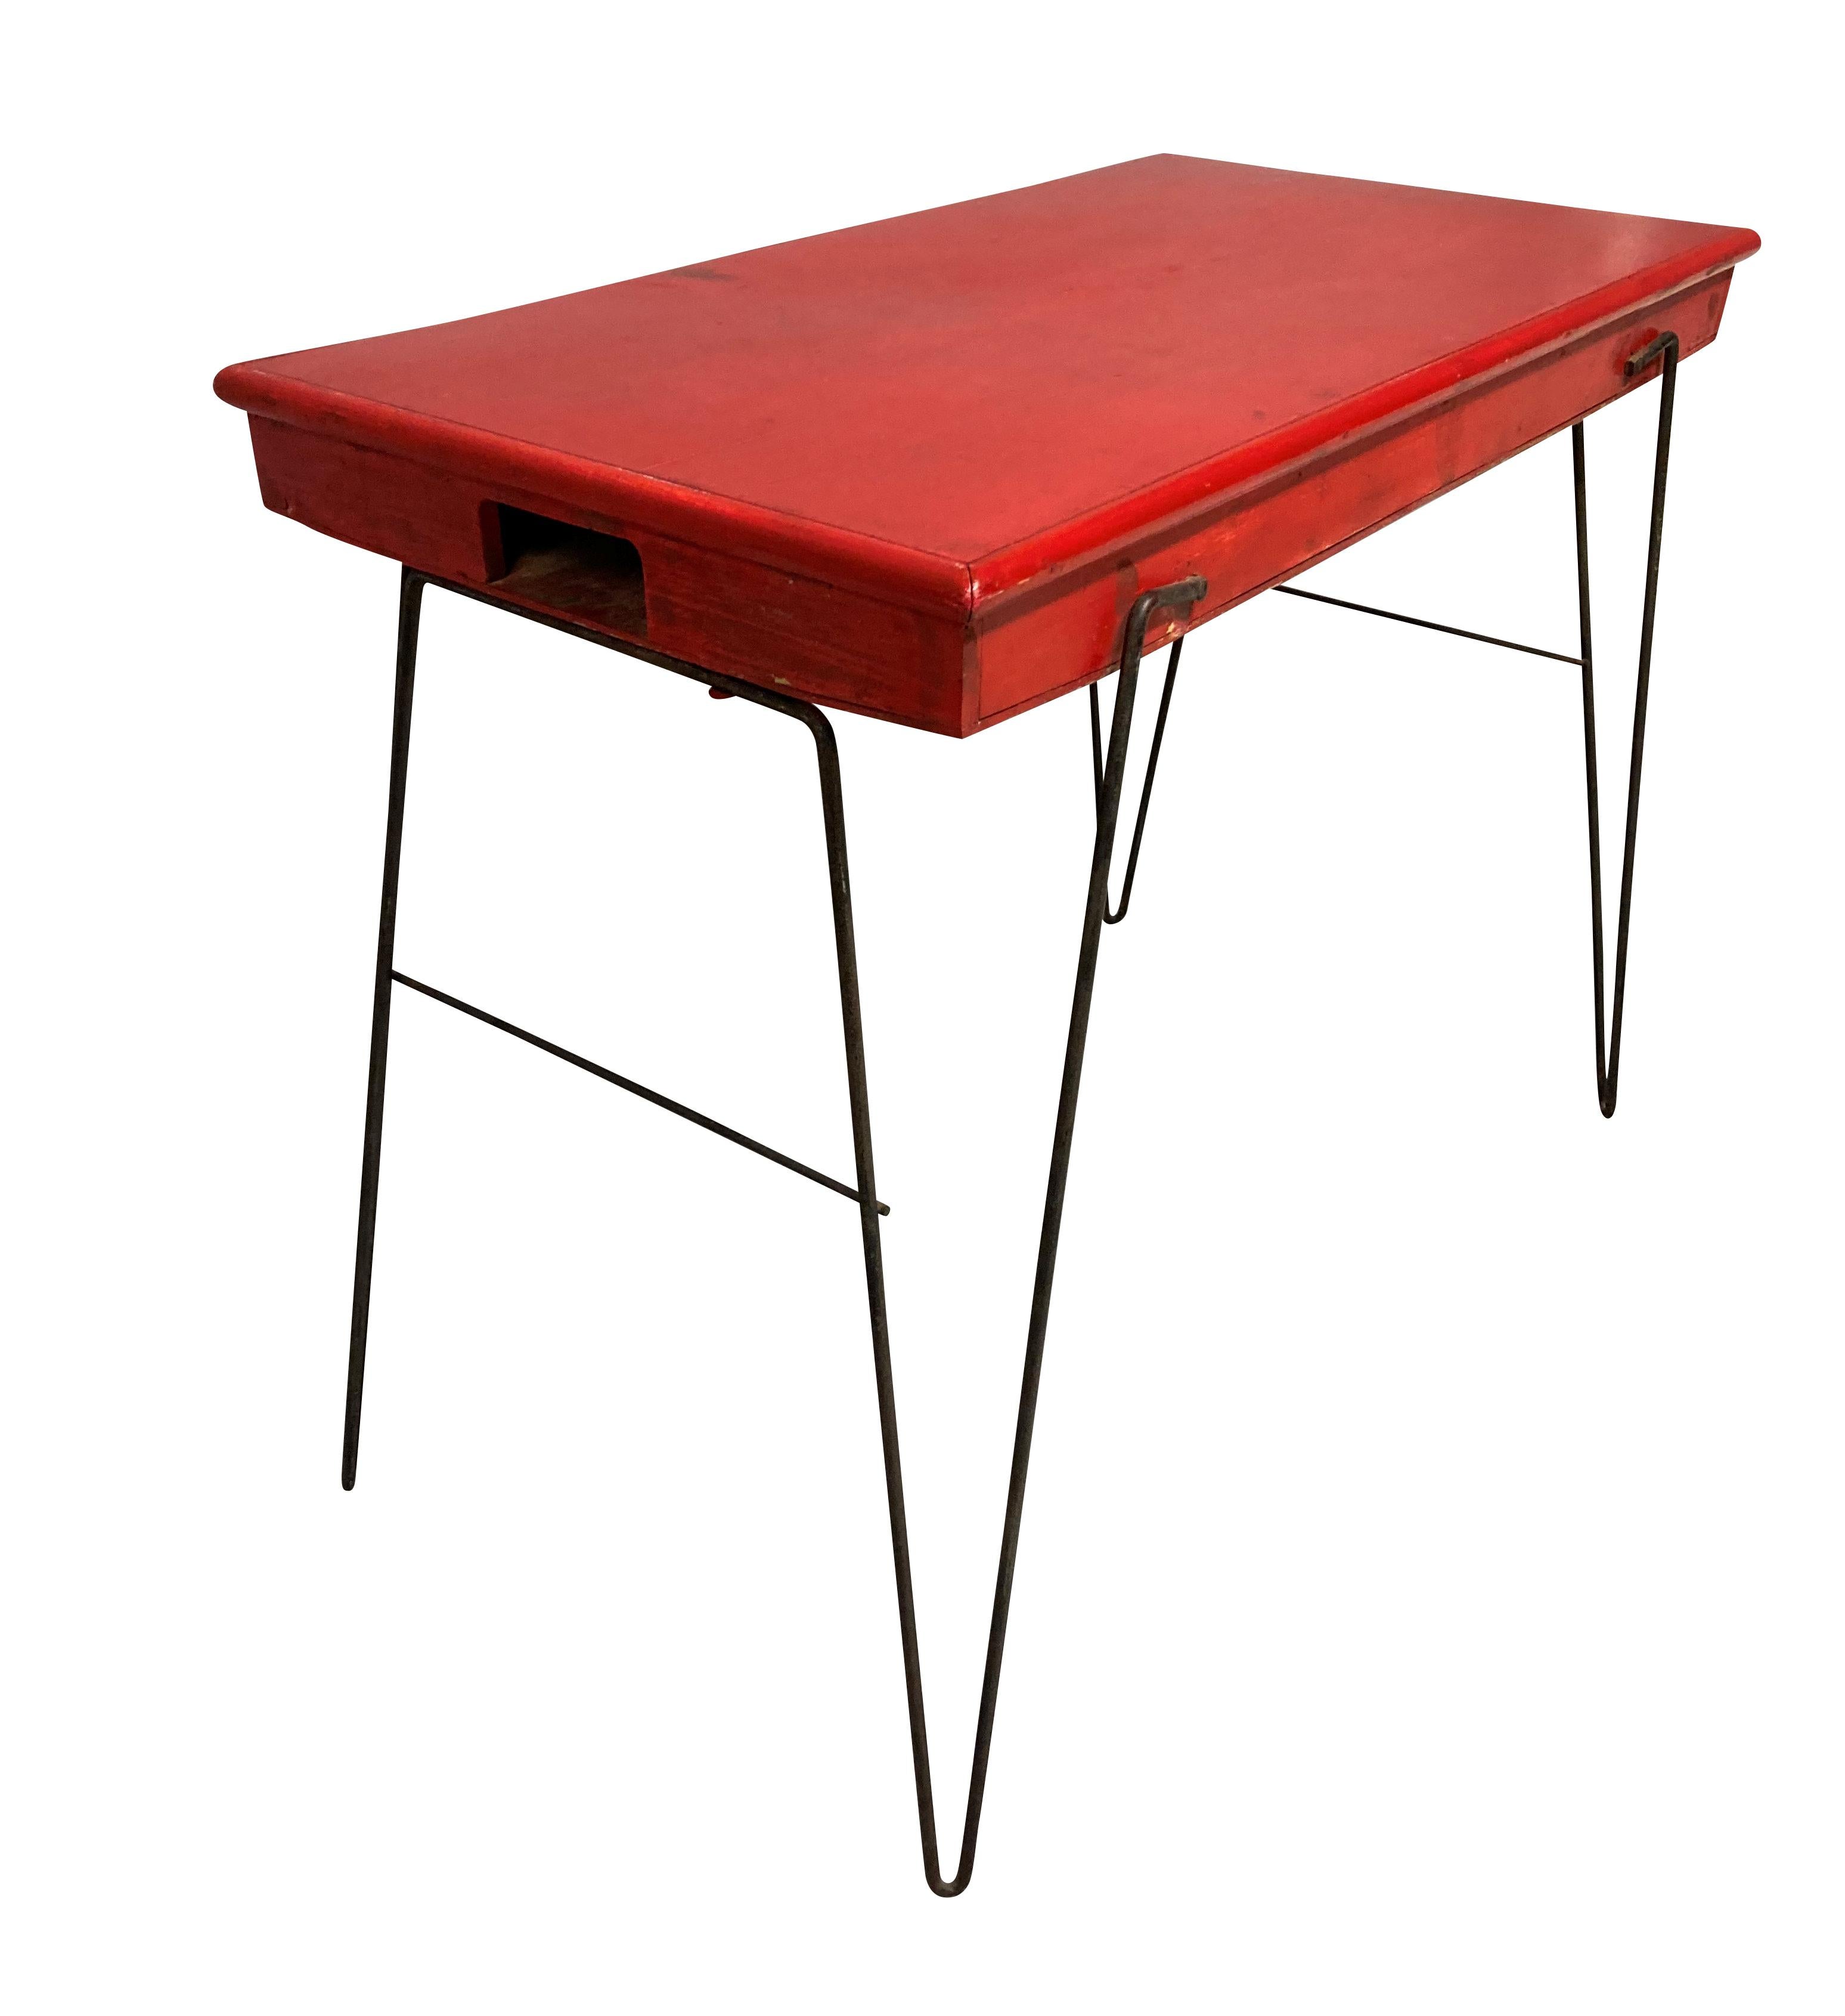 A French mid-century scarlet painted folding table, on tapering iron legs.